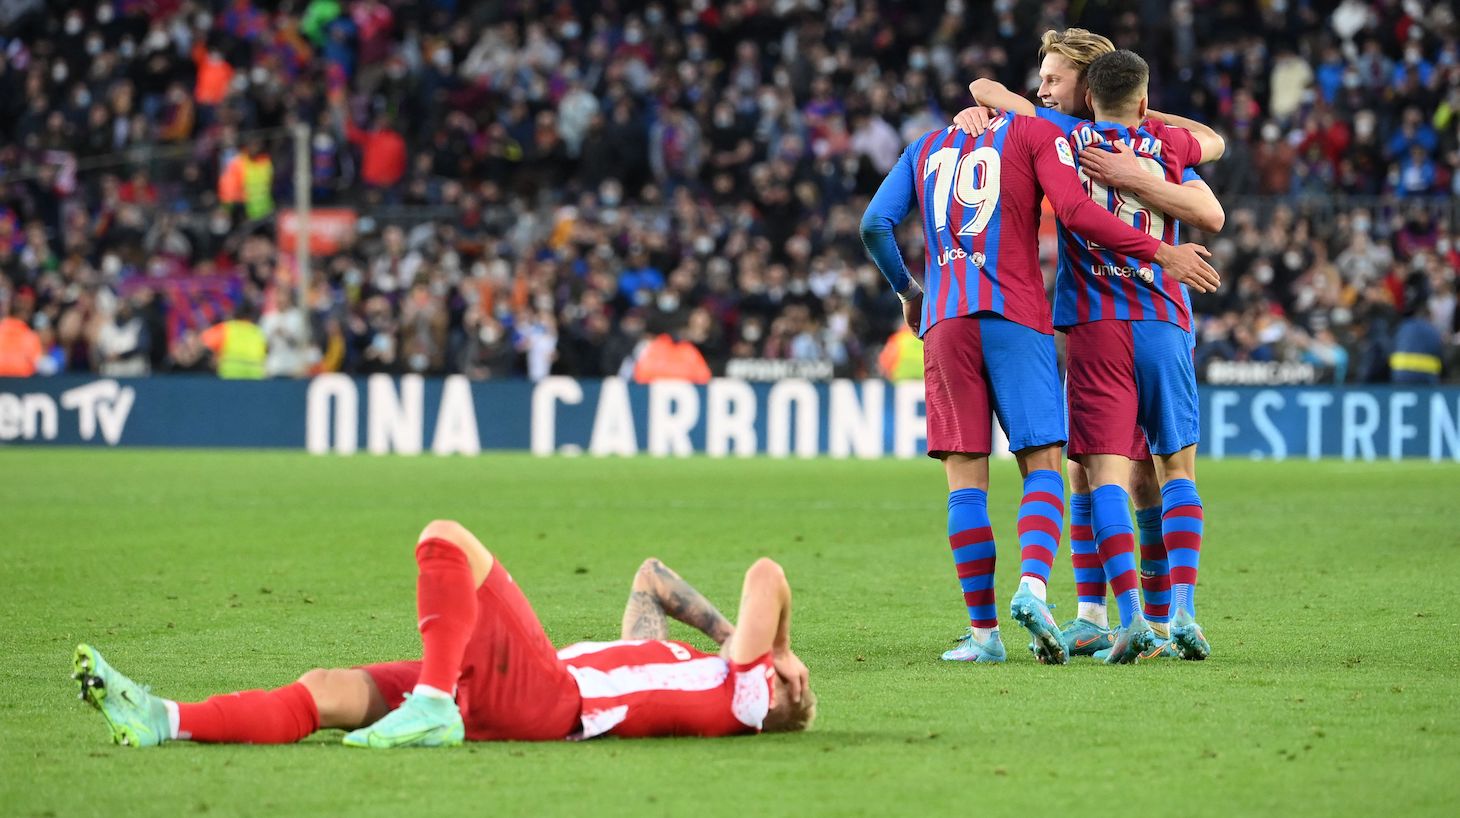 Barcelona's players celebrate their victory at the end of the Spanish league football match between FC Barcelona and Club Atletico de Madrid at the Camp Nou stadium in Barcelona on February 6, 2022.